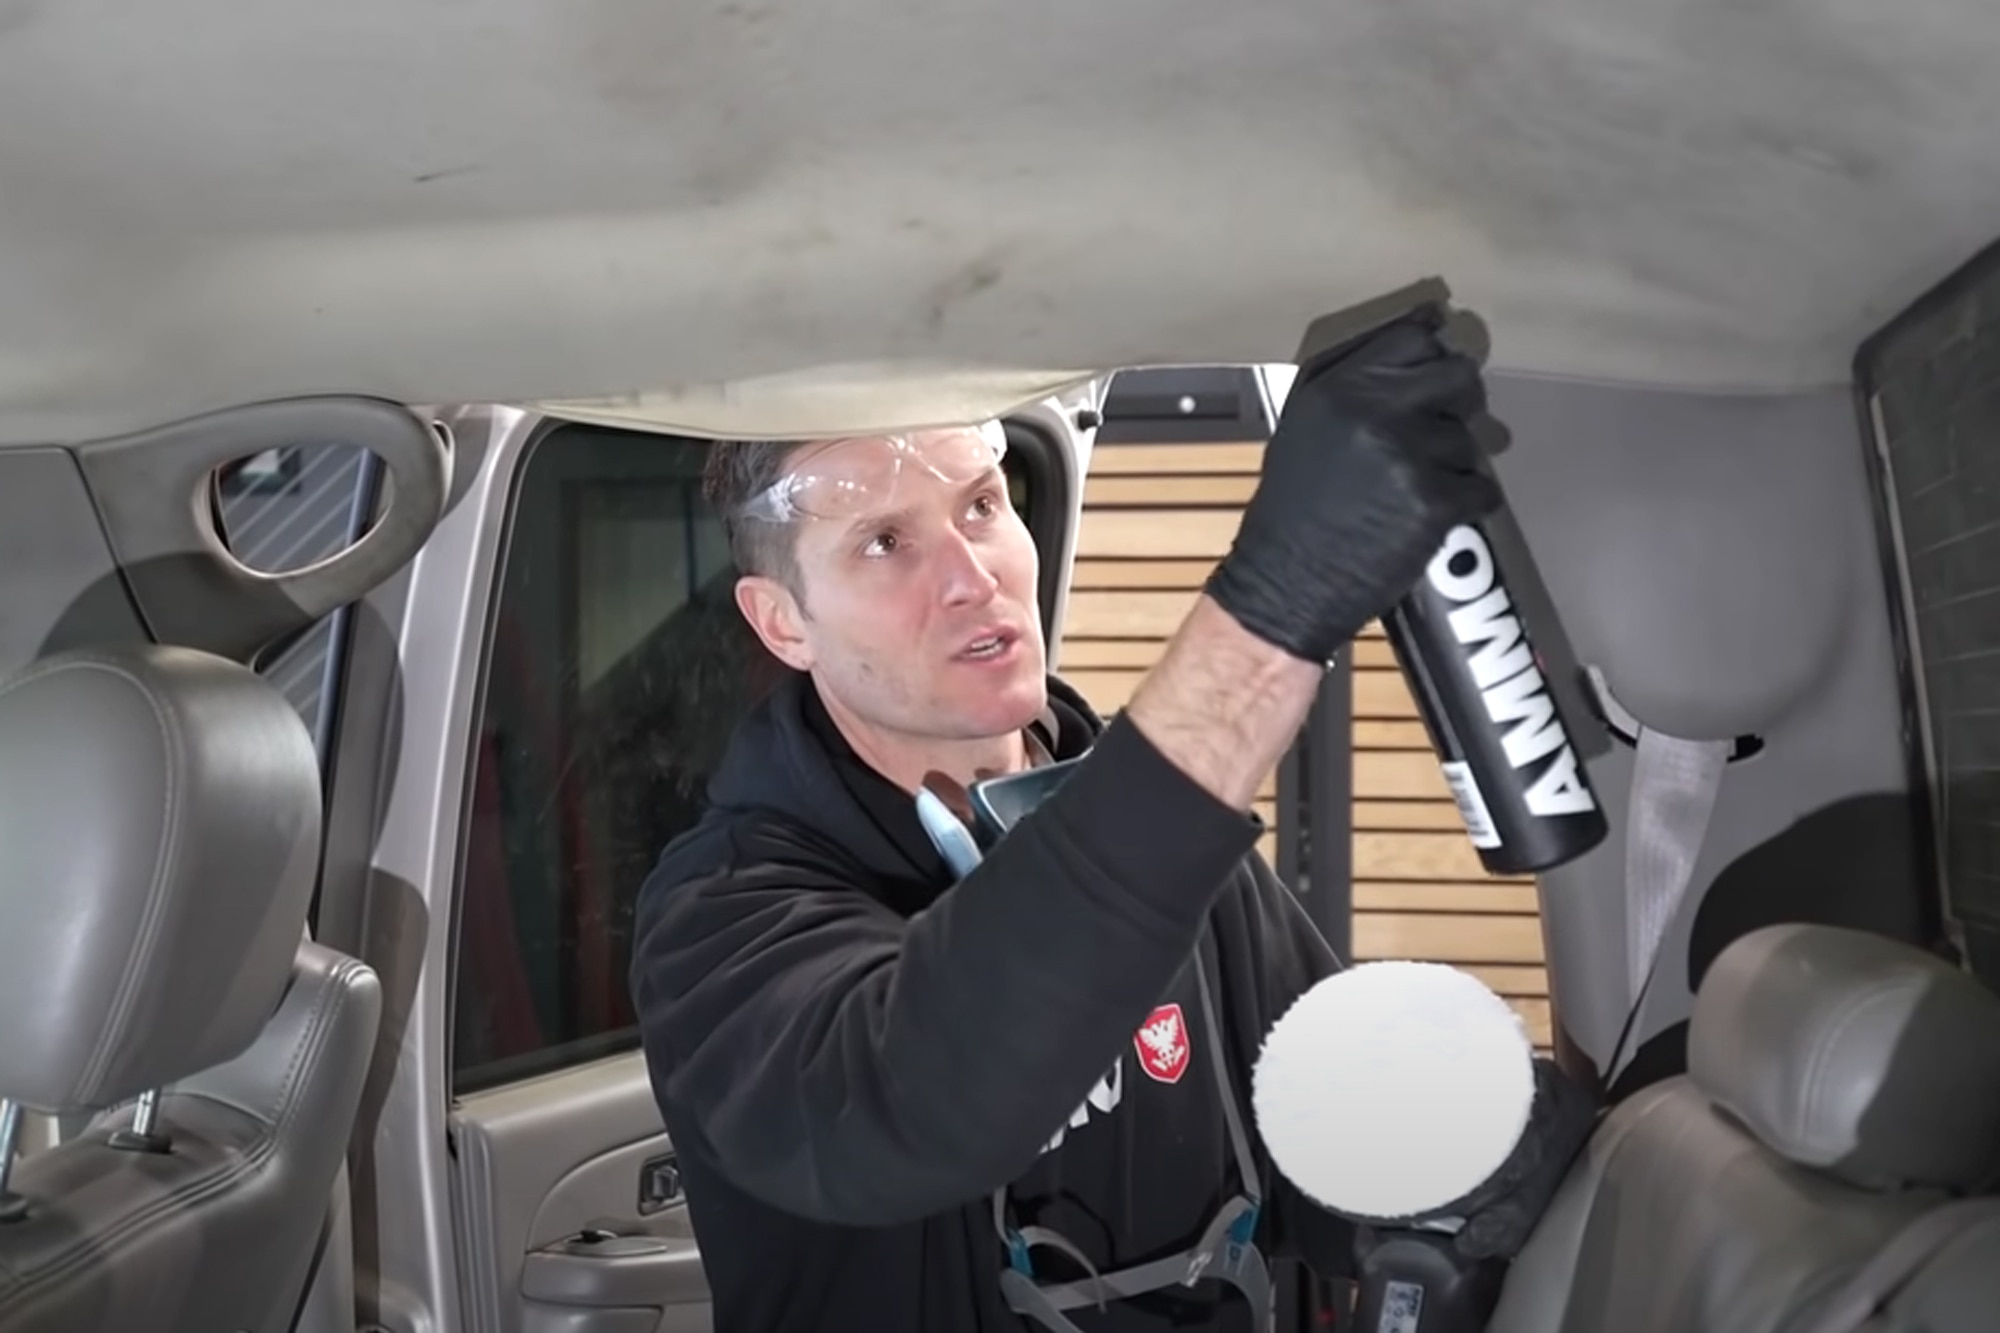 An auto detailer uses specialized spray cleaner on a car's headliner